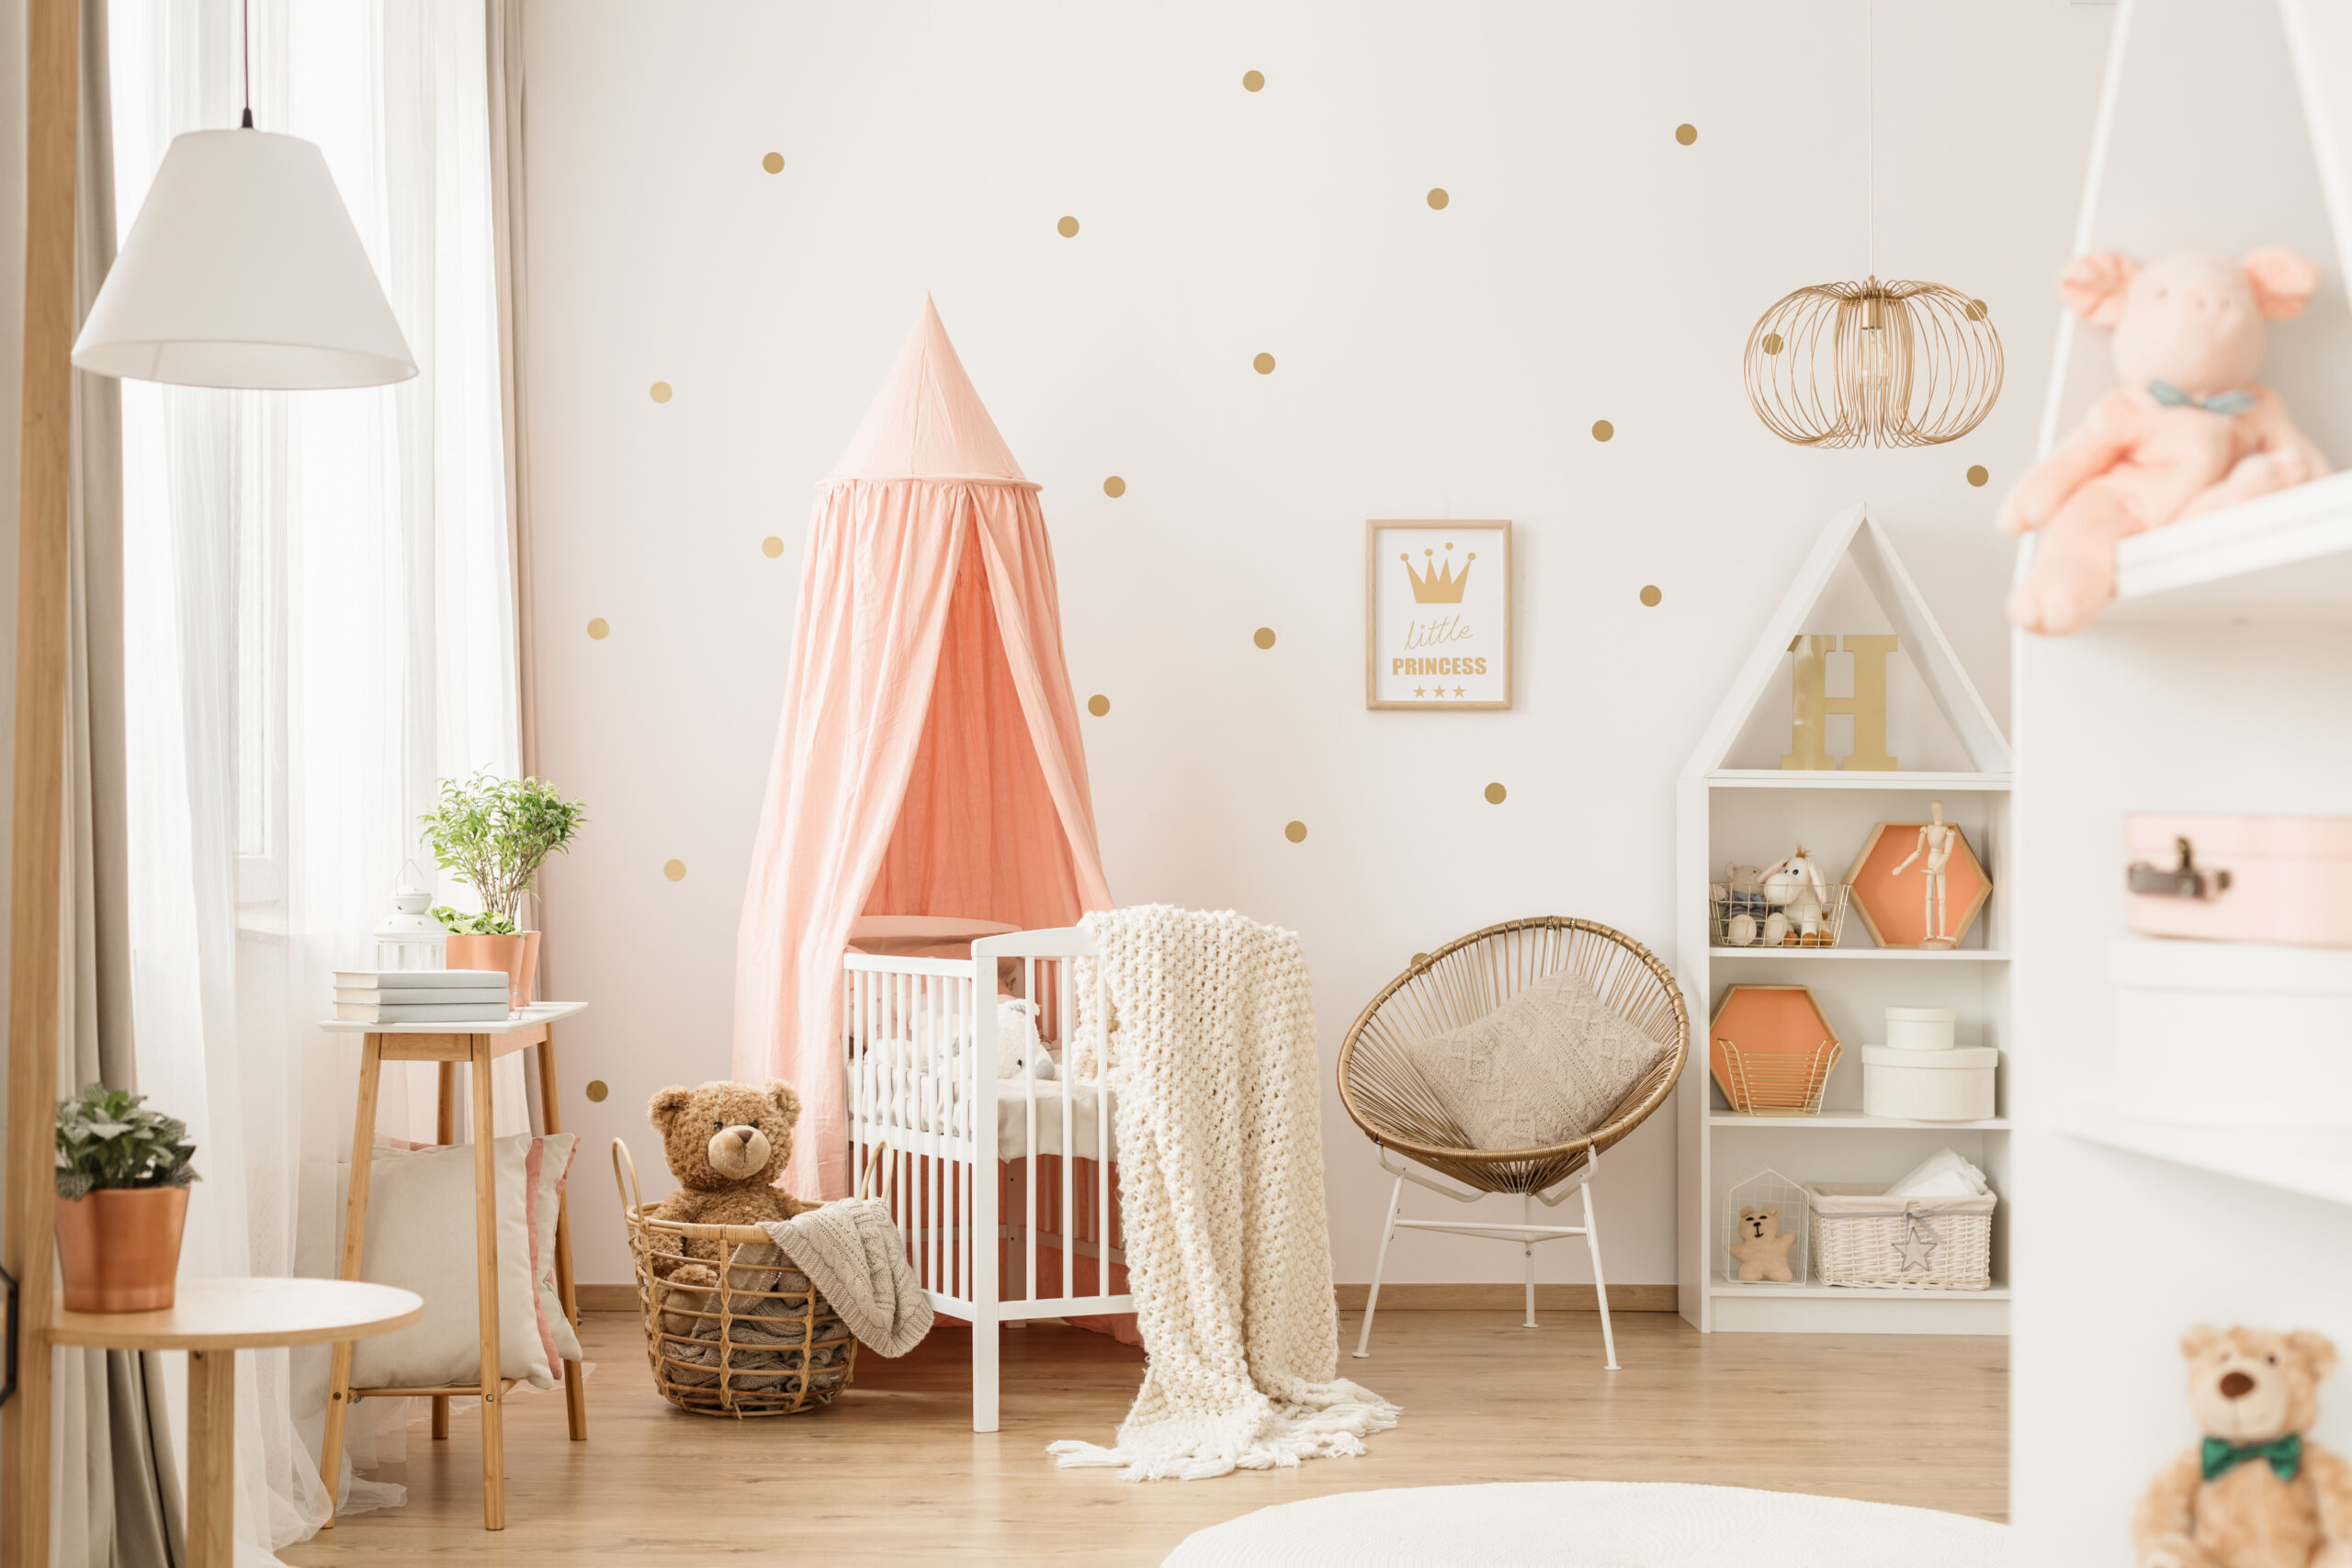 7 things you should consider when designing your baby’s nursery